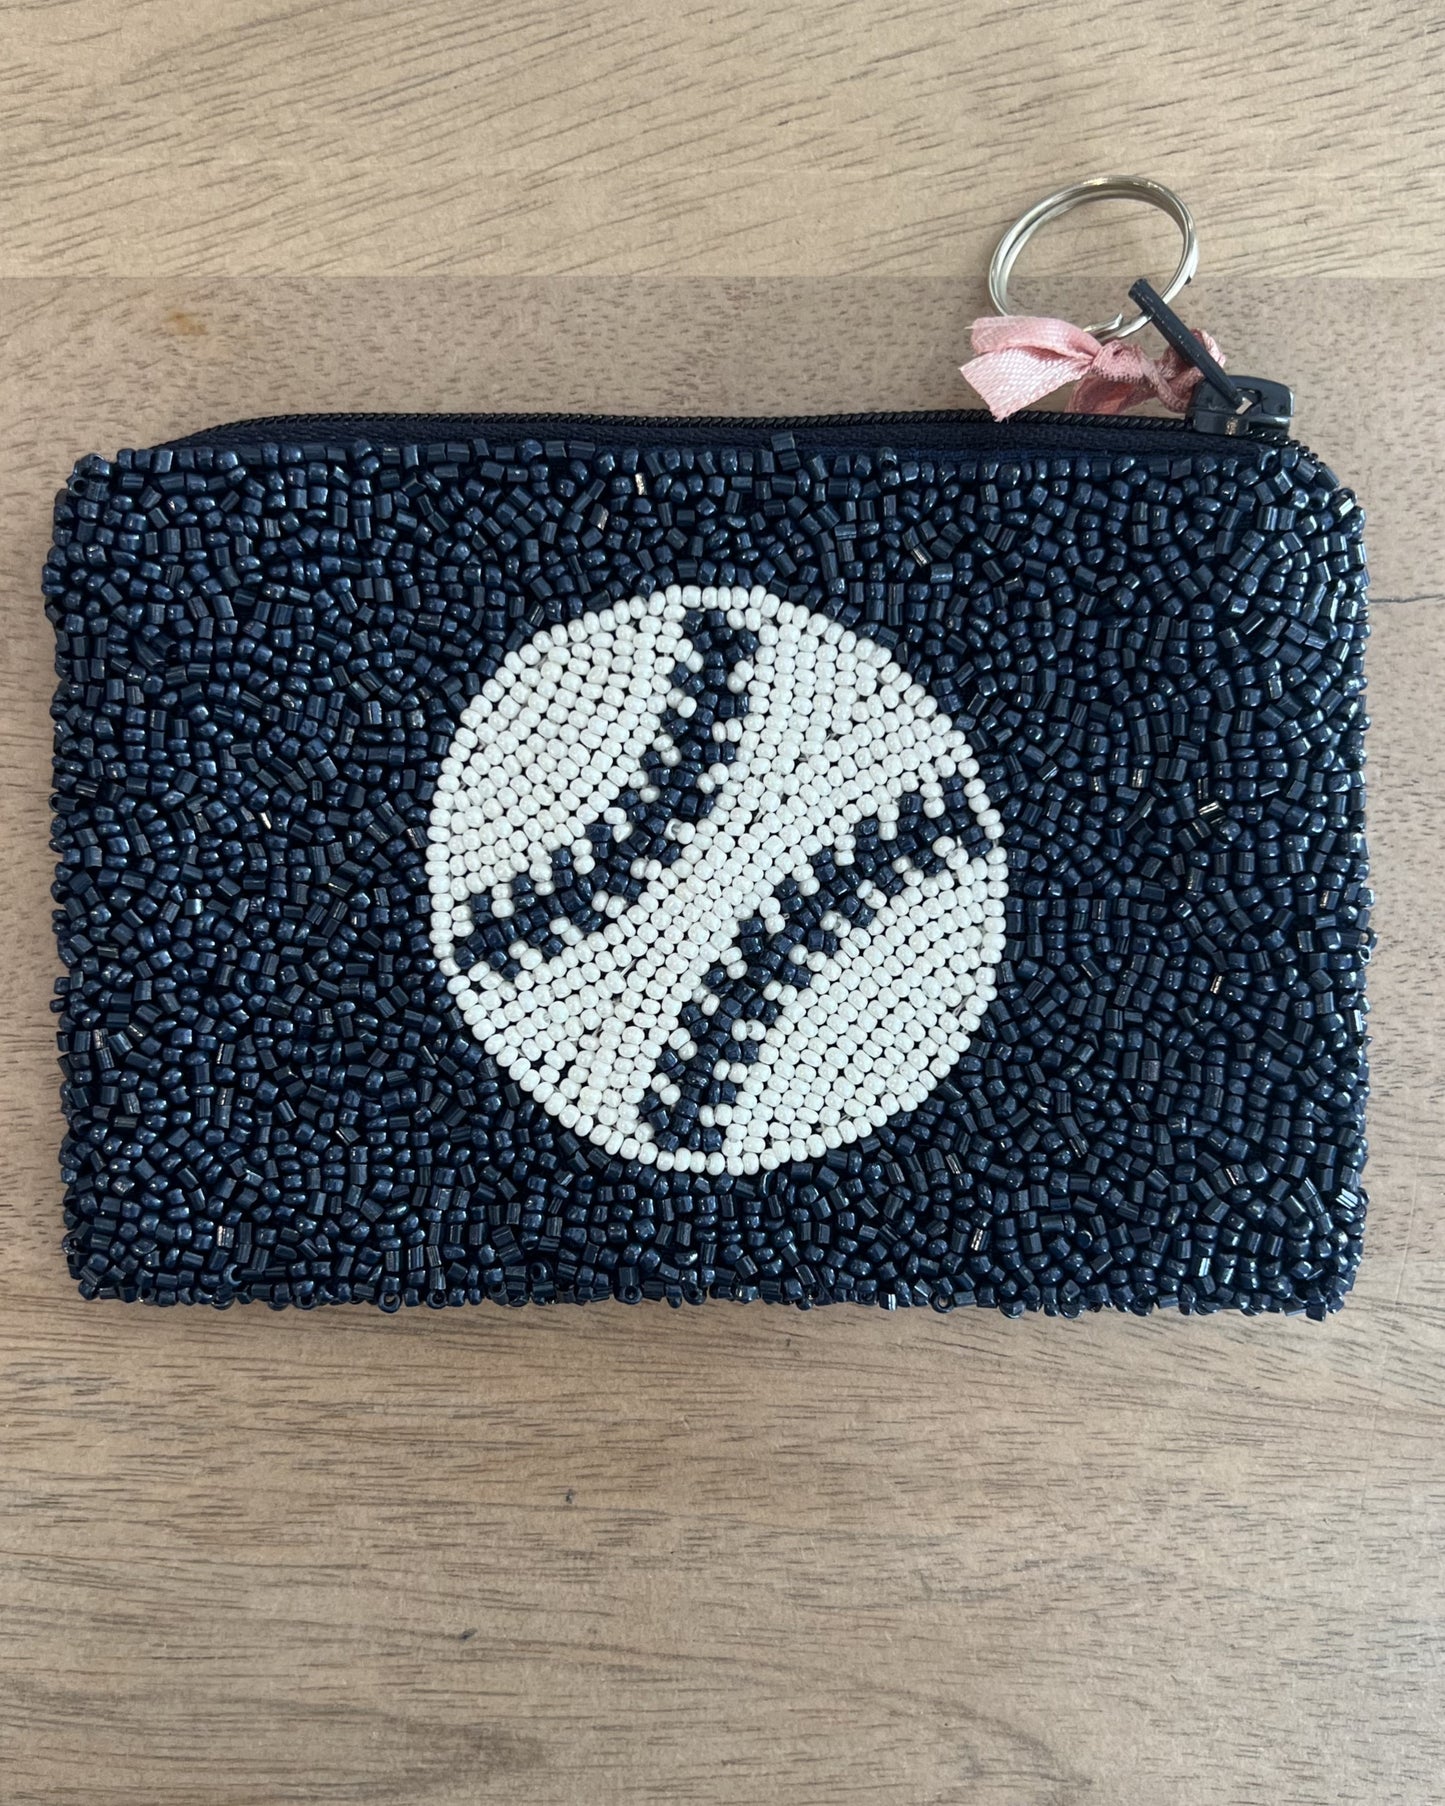 Image of Middlebury College Baseball Coin Purse Navy/White on a brown background